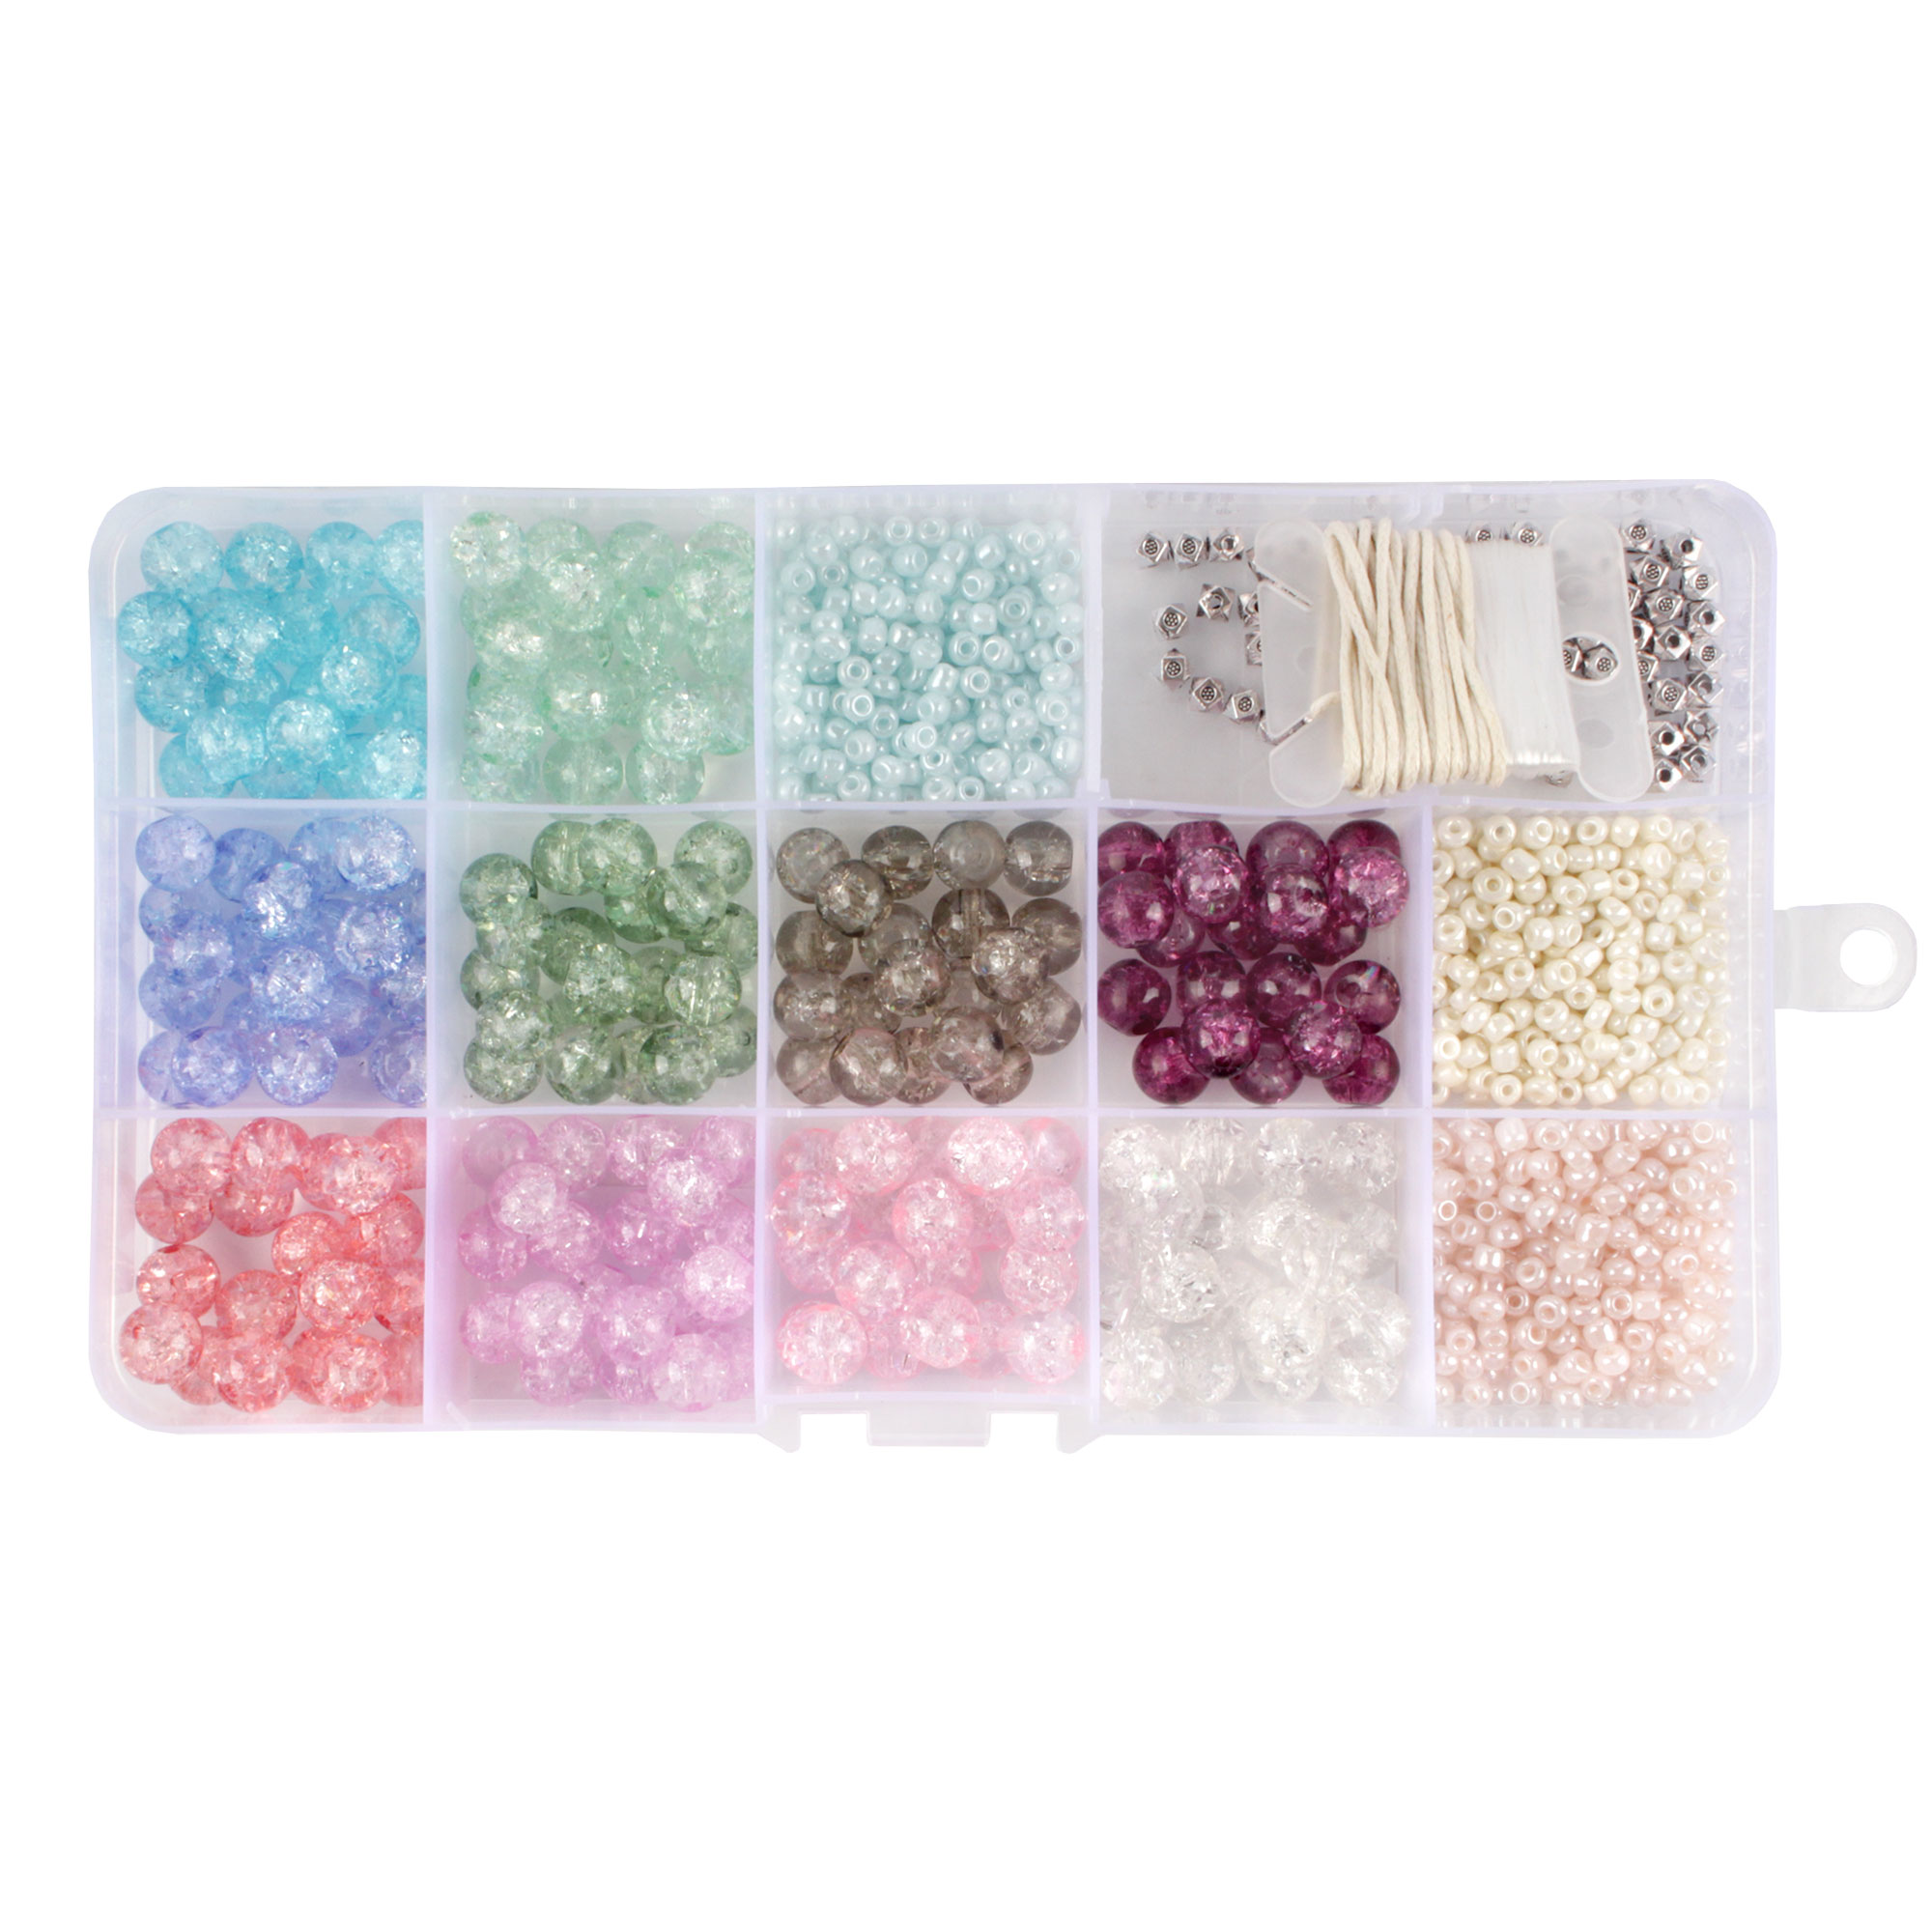 Assorted Bead Kits - DIY Bracelet and Necklace Craft Set - Crystal Glass  Beads and Alloy Accessories with 3.5m of Wax & Elastic Thread - Assortment  218 